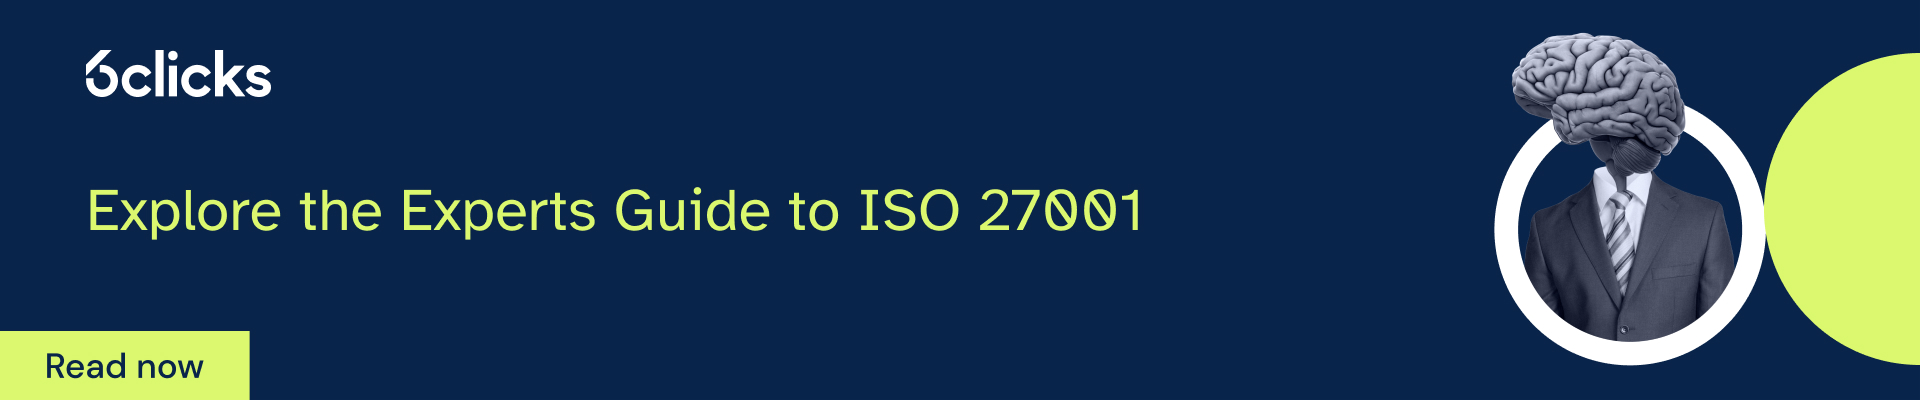 Experts guide to ISO 27001